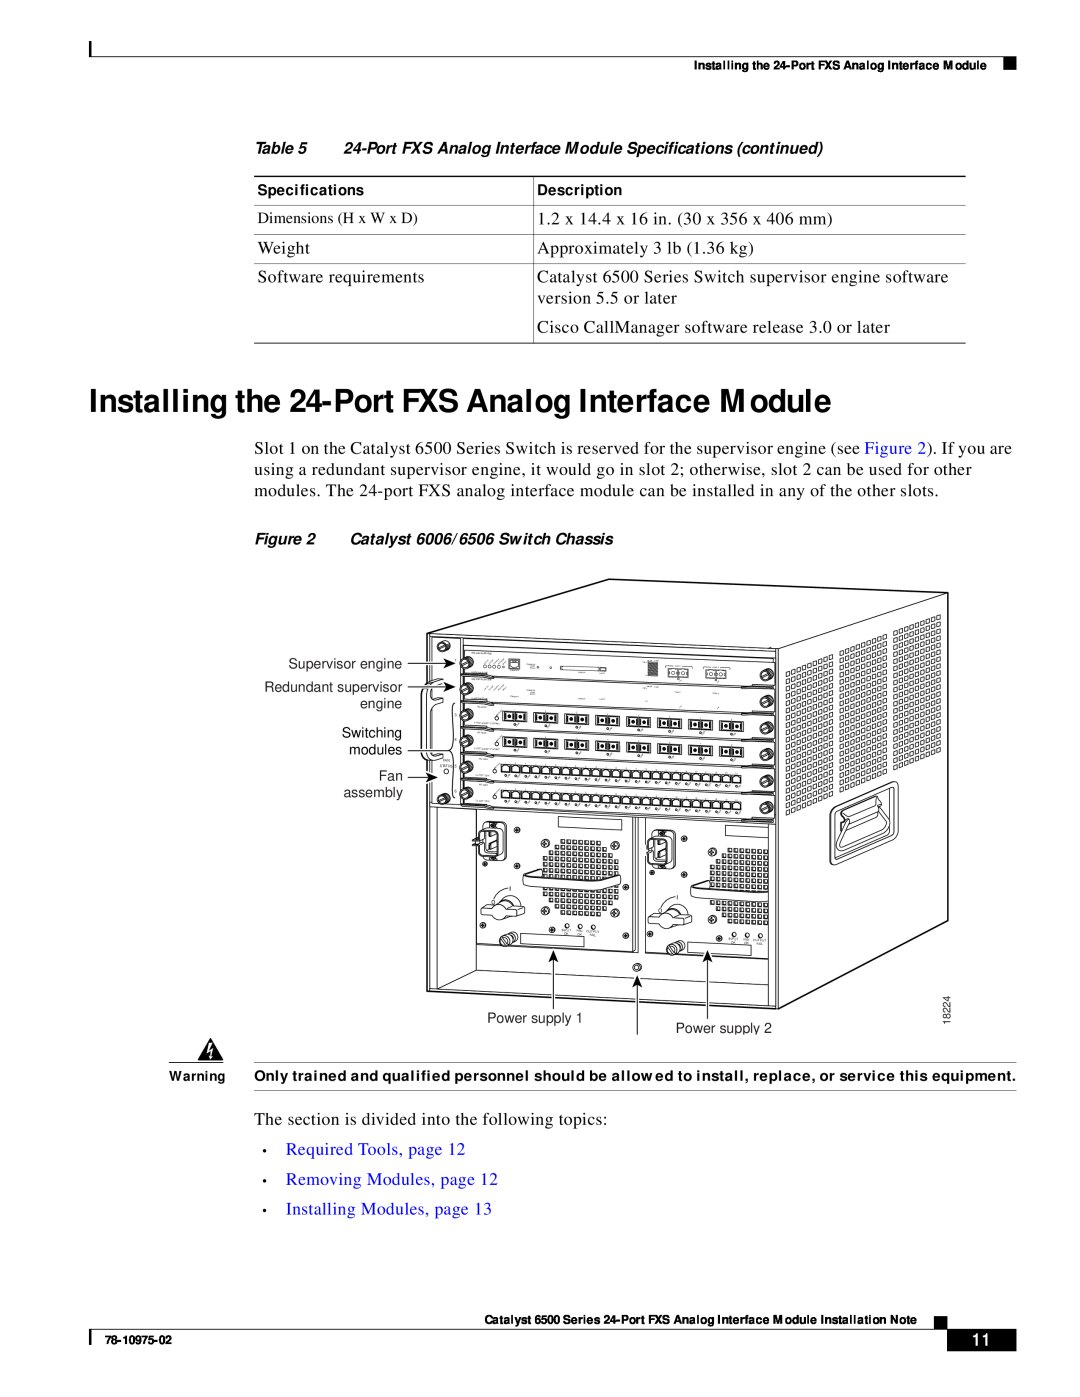 Cisco Systems WS-X6624-FXS specifications Installing the 24-Port FXS Analog Interface Module 